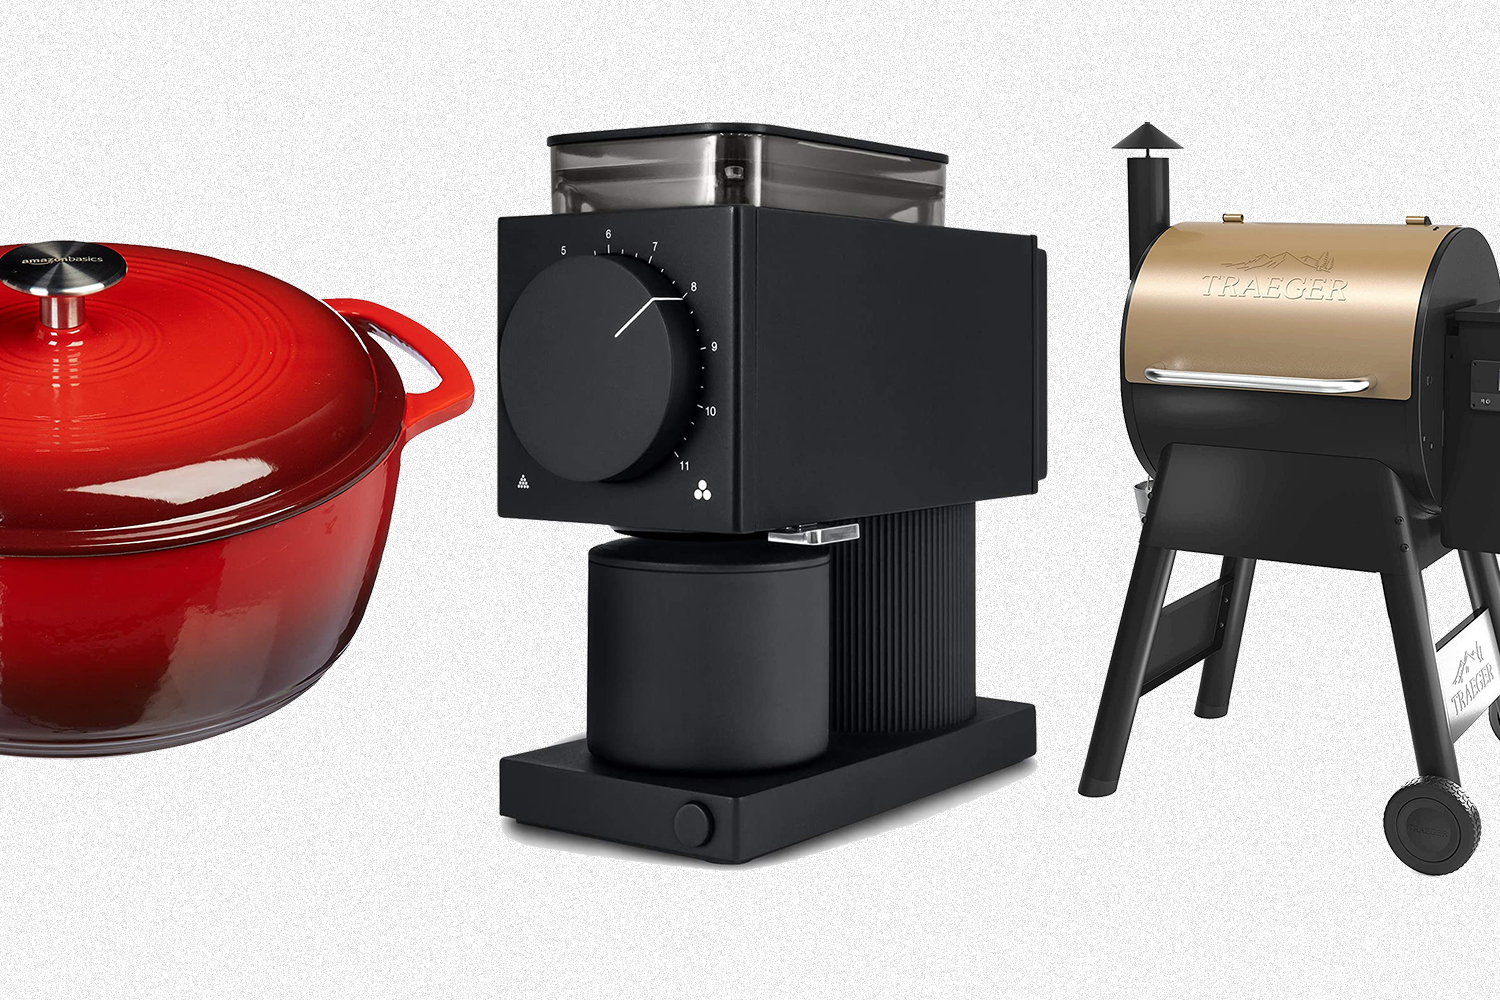 An Amazon Basics Dutch oven, Fellow's Ode brew grinder and a Traeger wood-pellet grill